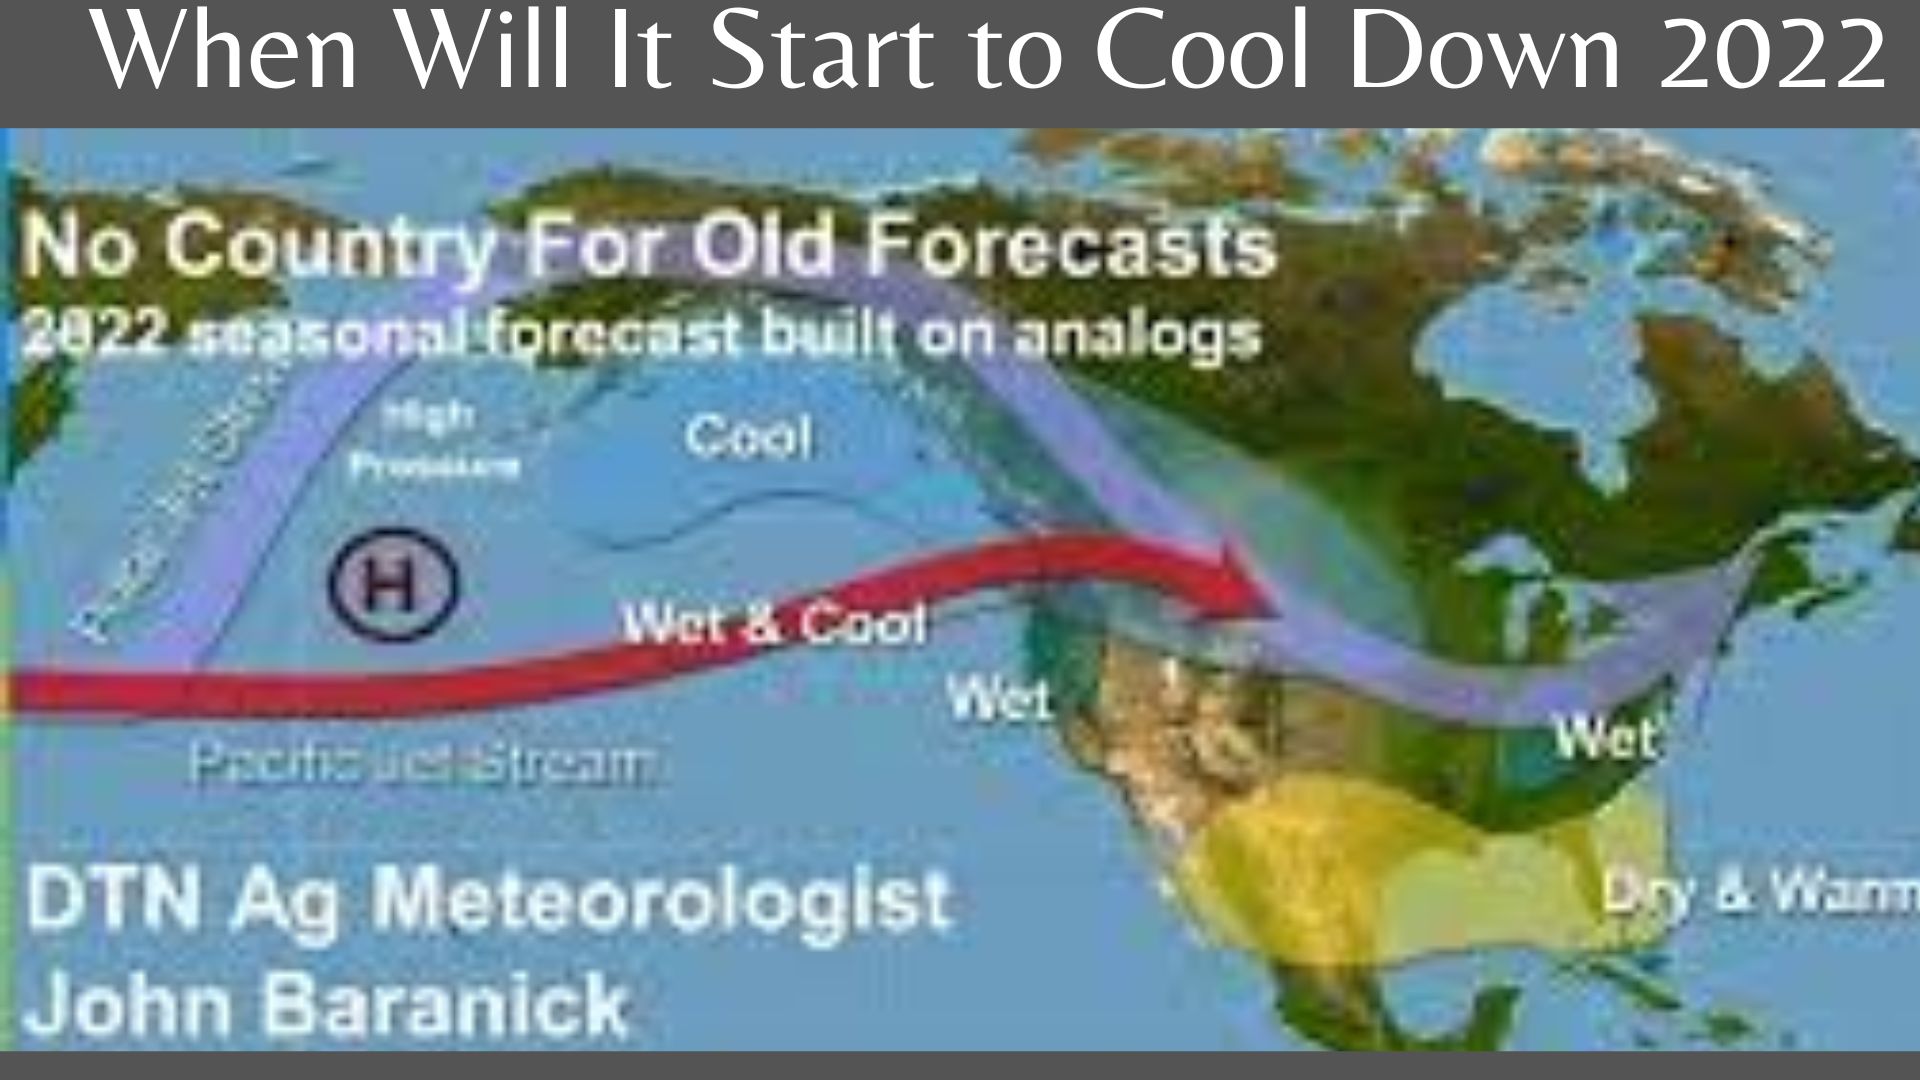 When Will It Start to Cool Down 2022 {Aug} Know The Location Details!